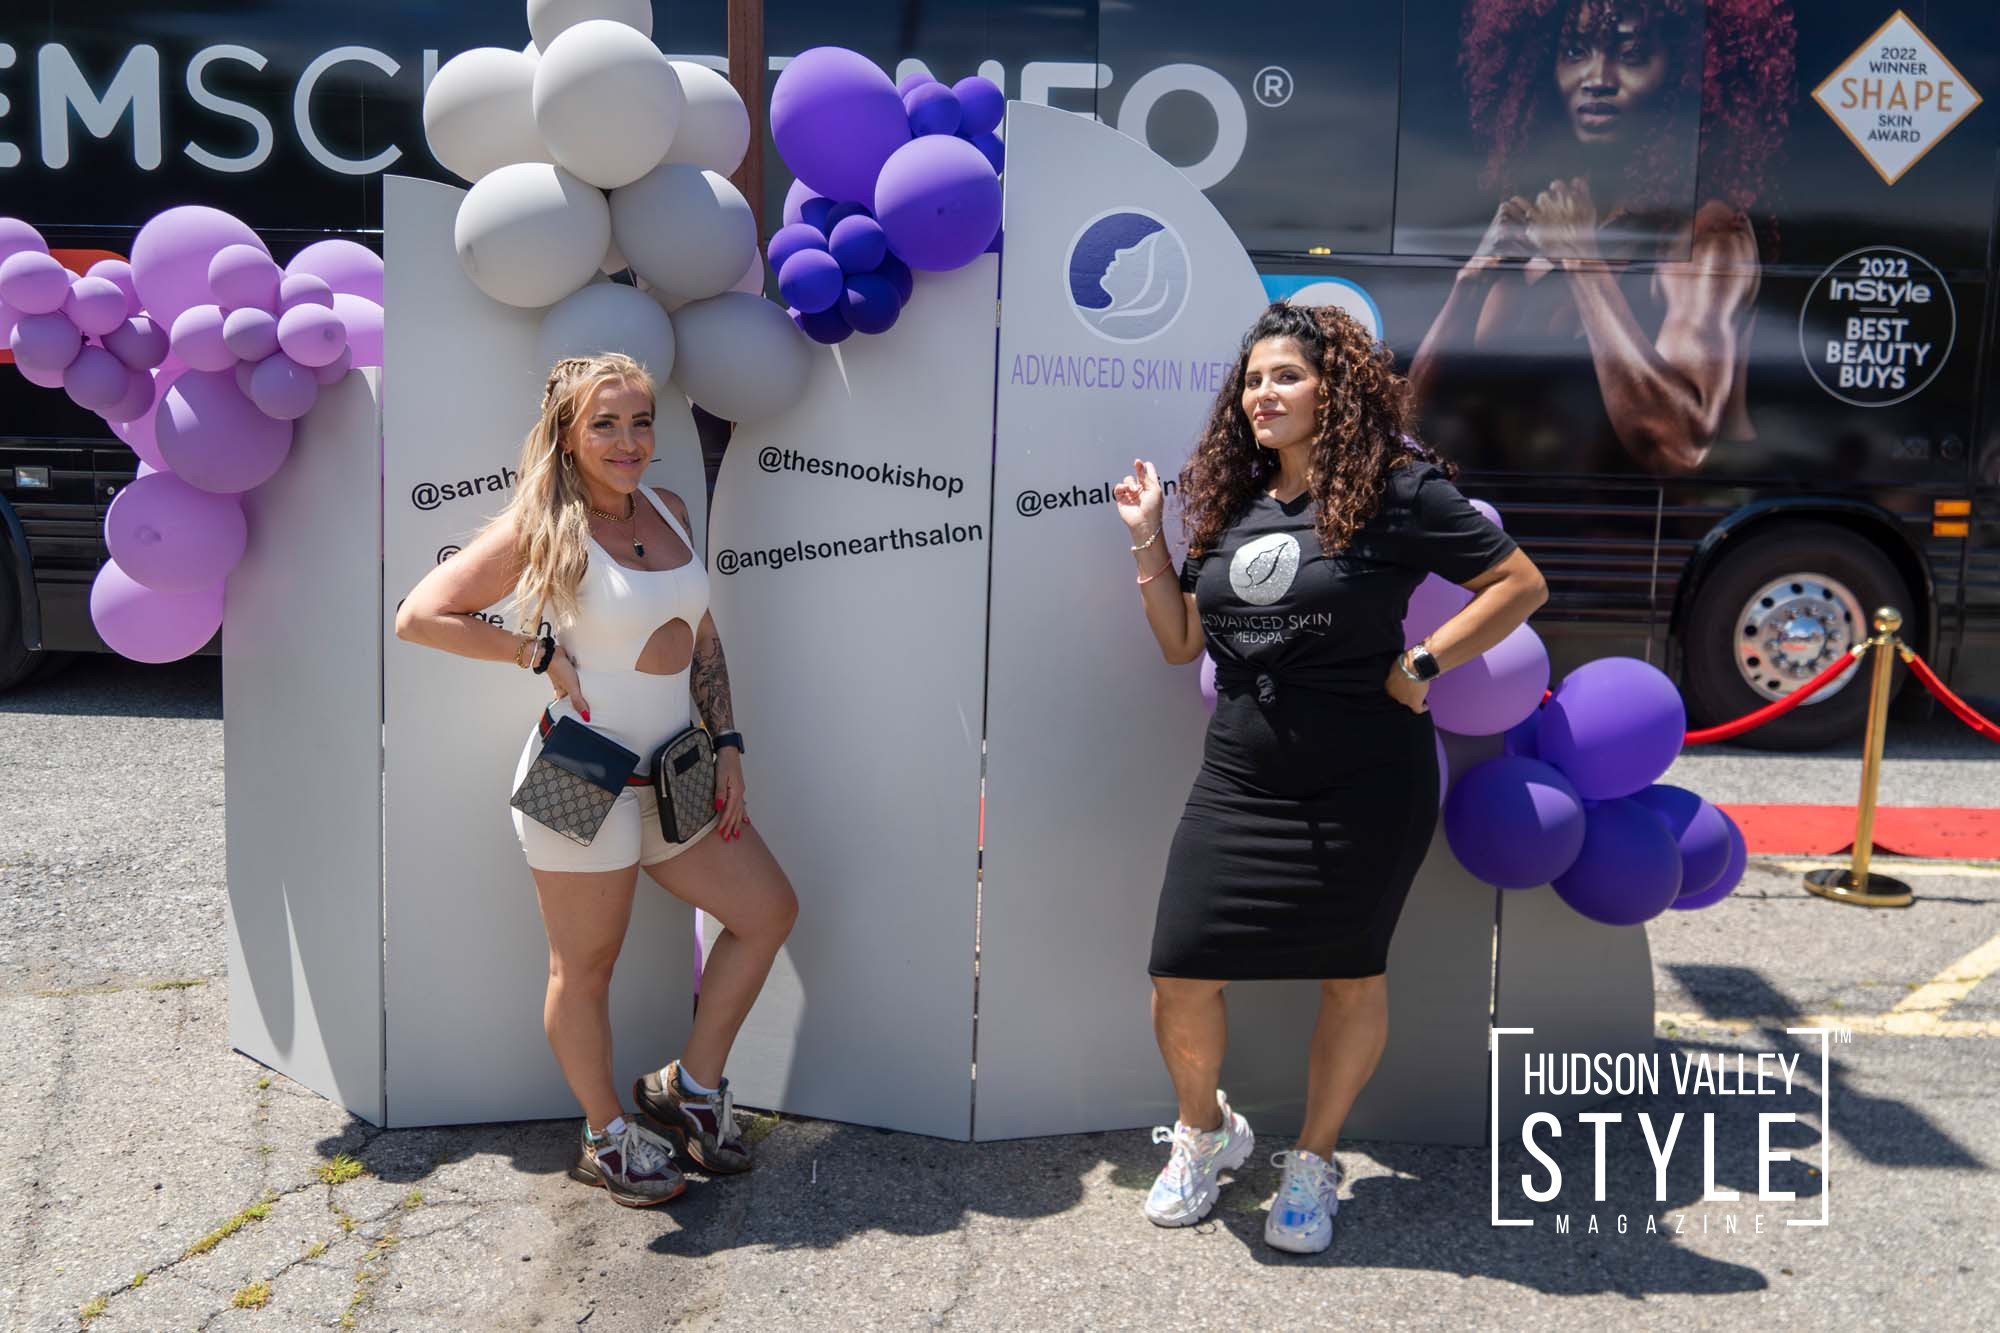 Snooki and the Snooki Shop at The Advanced Skin Med Spa Event in Fishkill, NY – Hudson Valley Style Magazine Photo Report by Maxwell Alexander